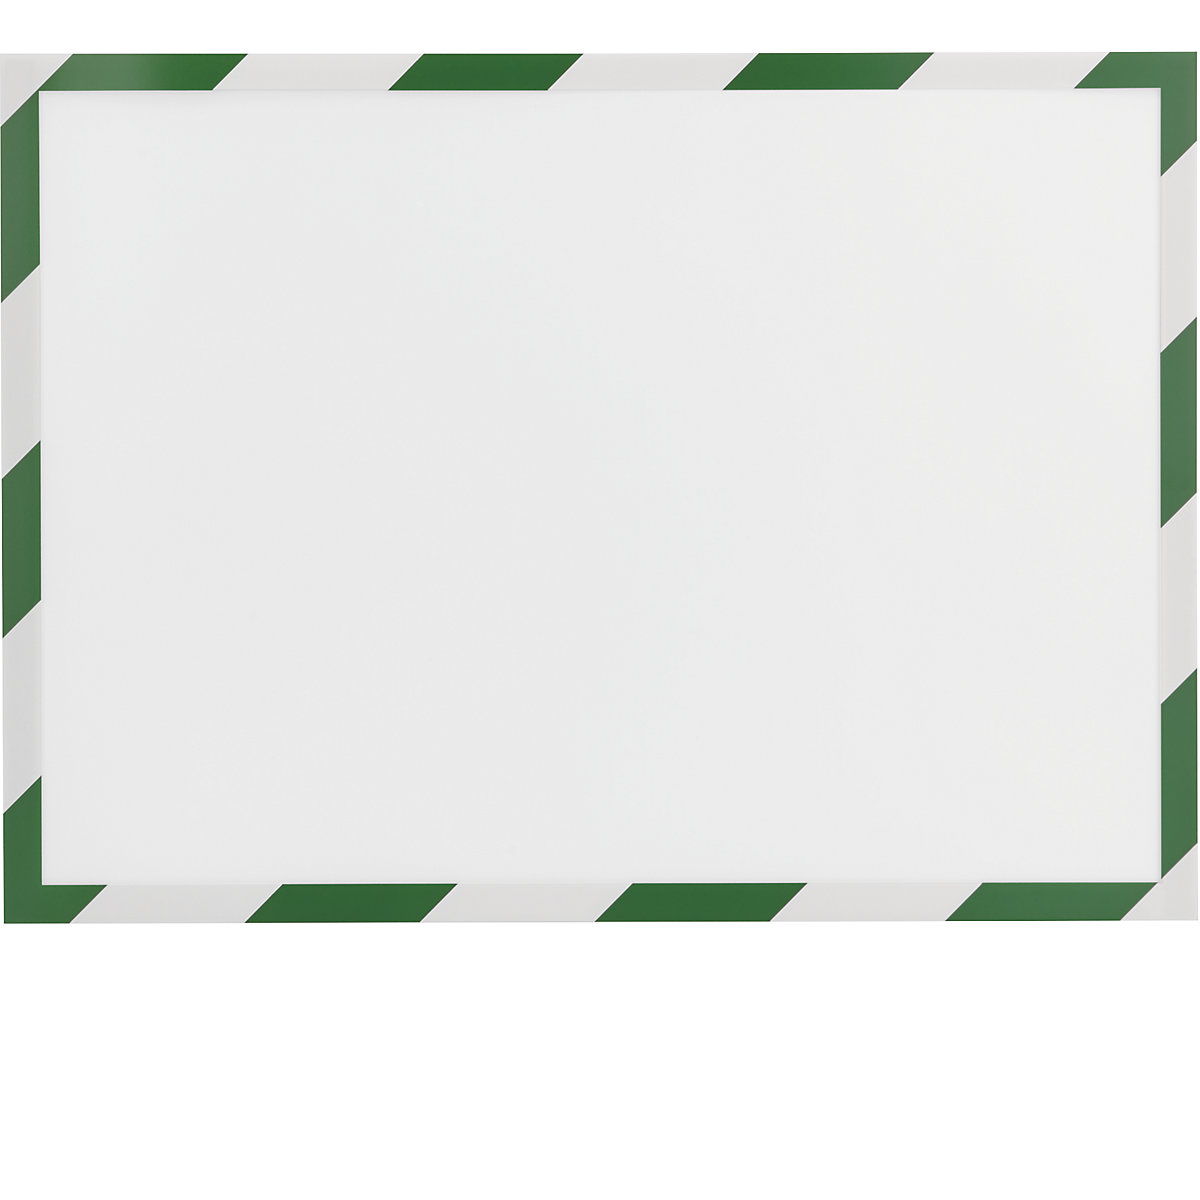 SAFETY magnetic frame – magnetoplan, pack of 5, A4 format, green-white-8